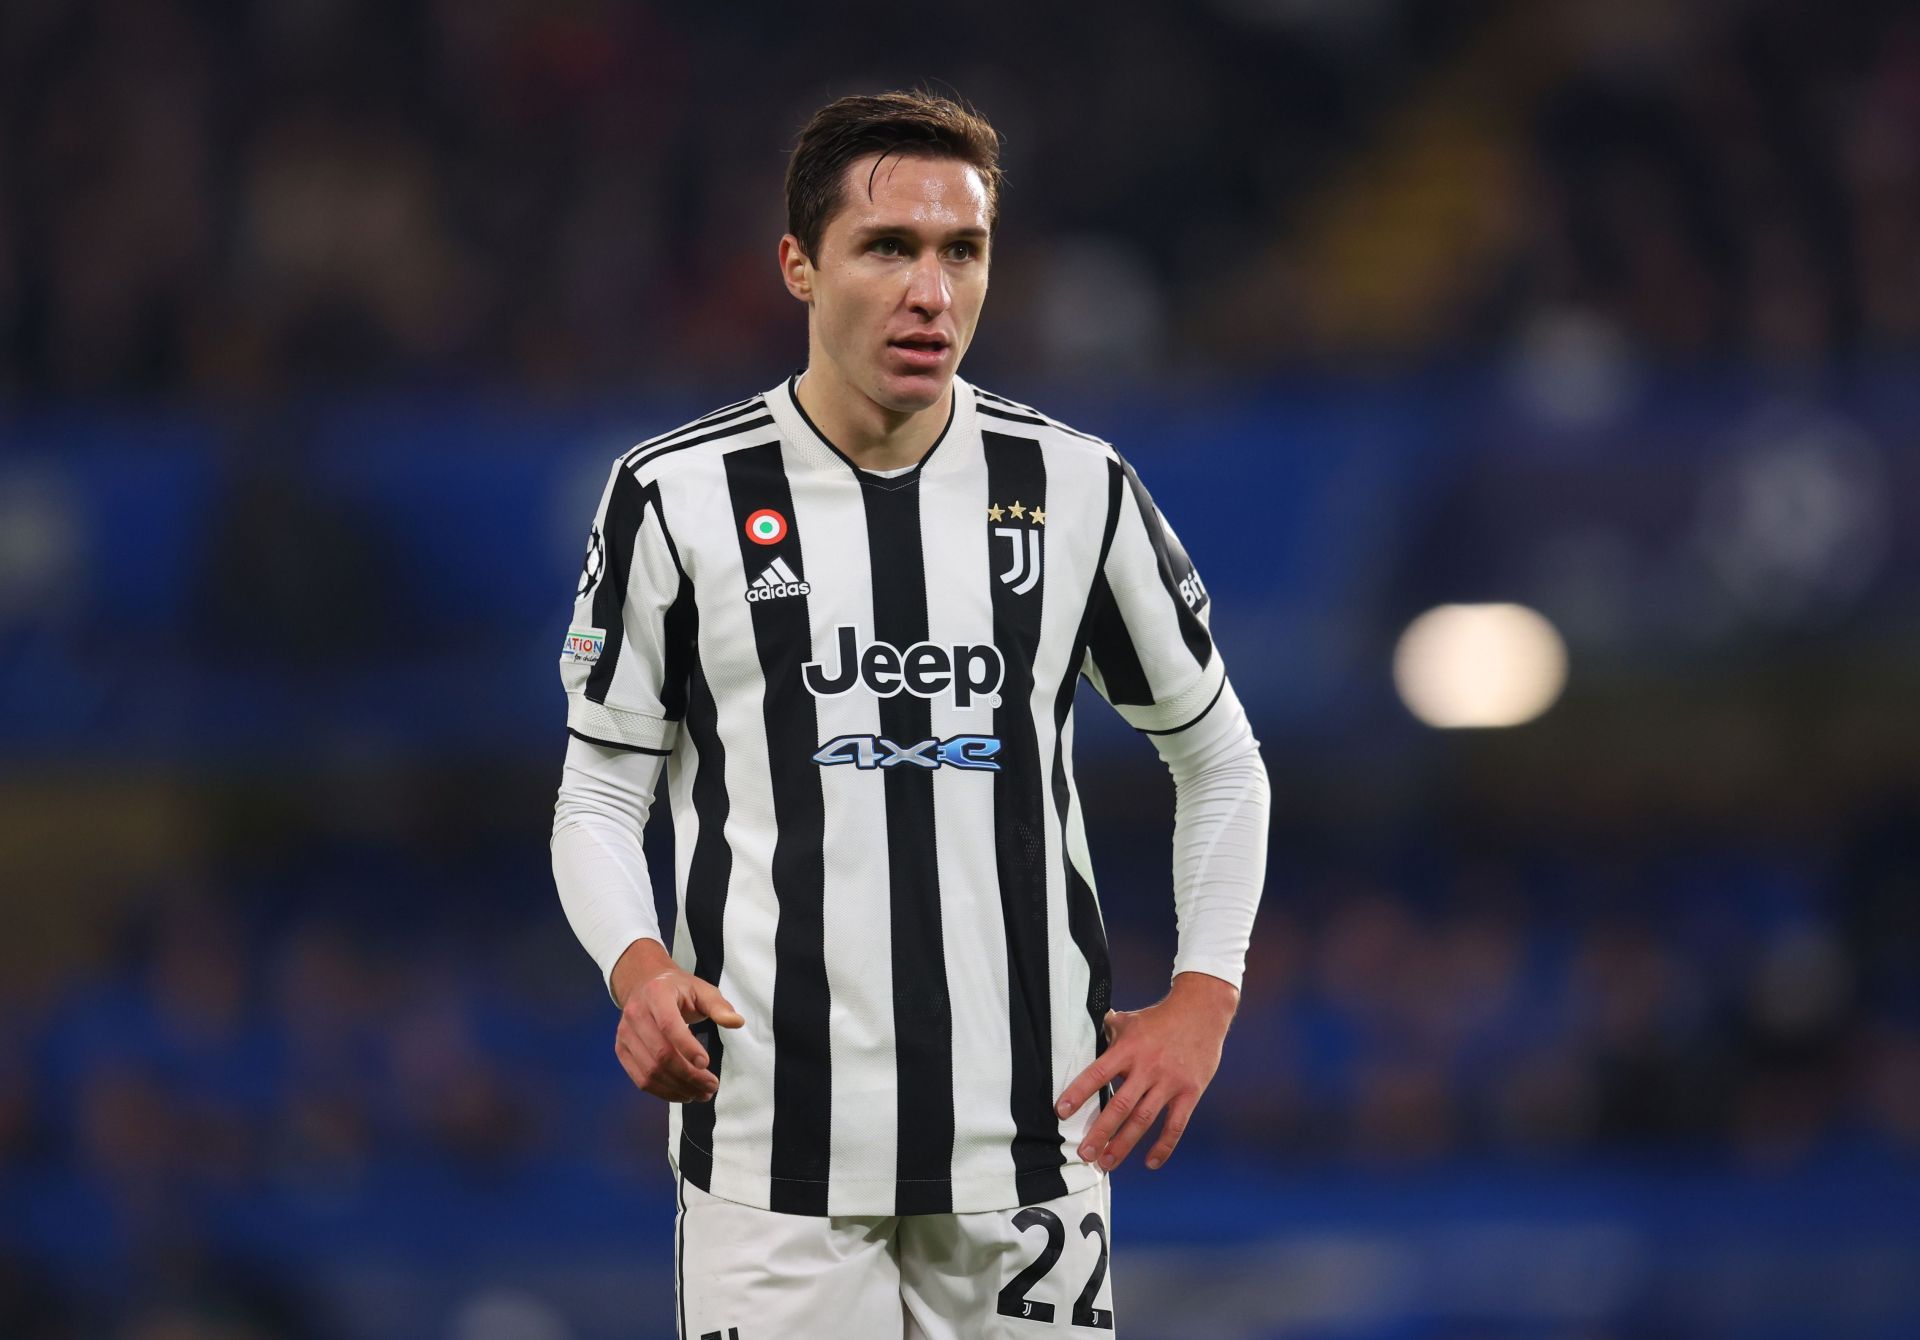 Federico Chiesa has been a key player for the Bianconeri